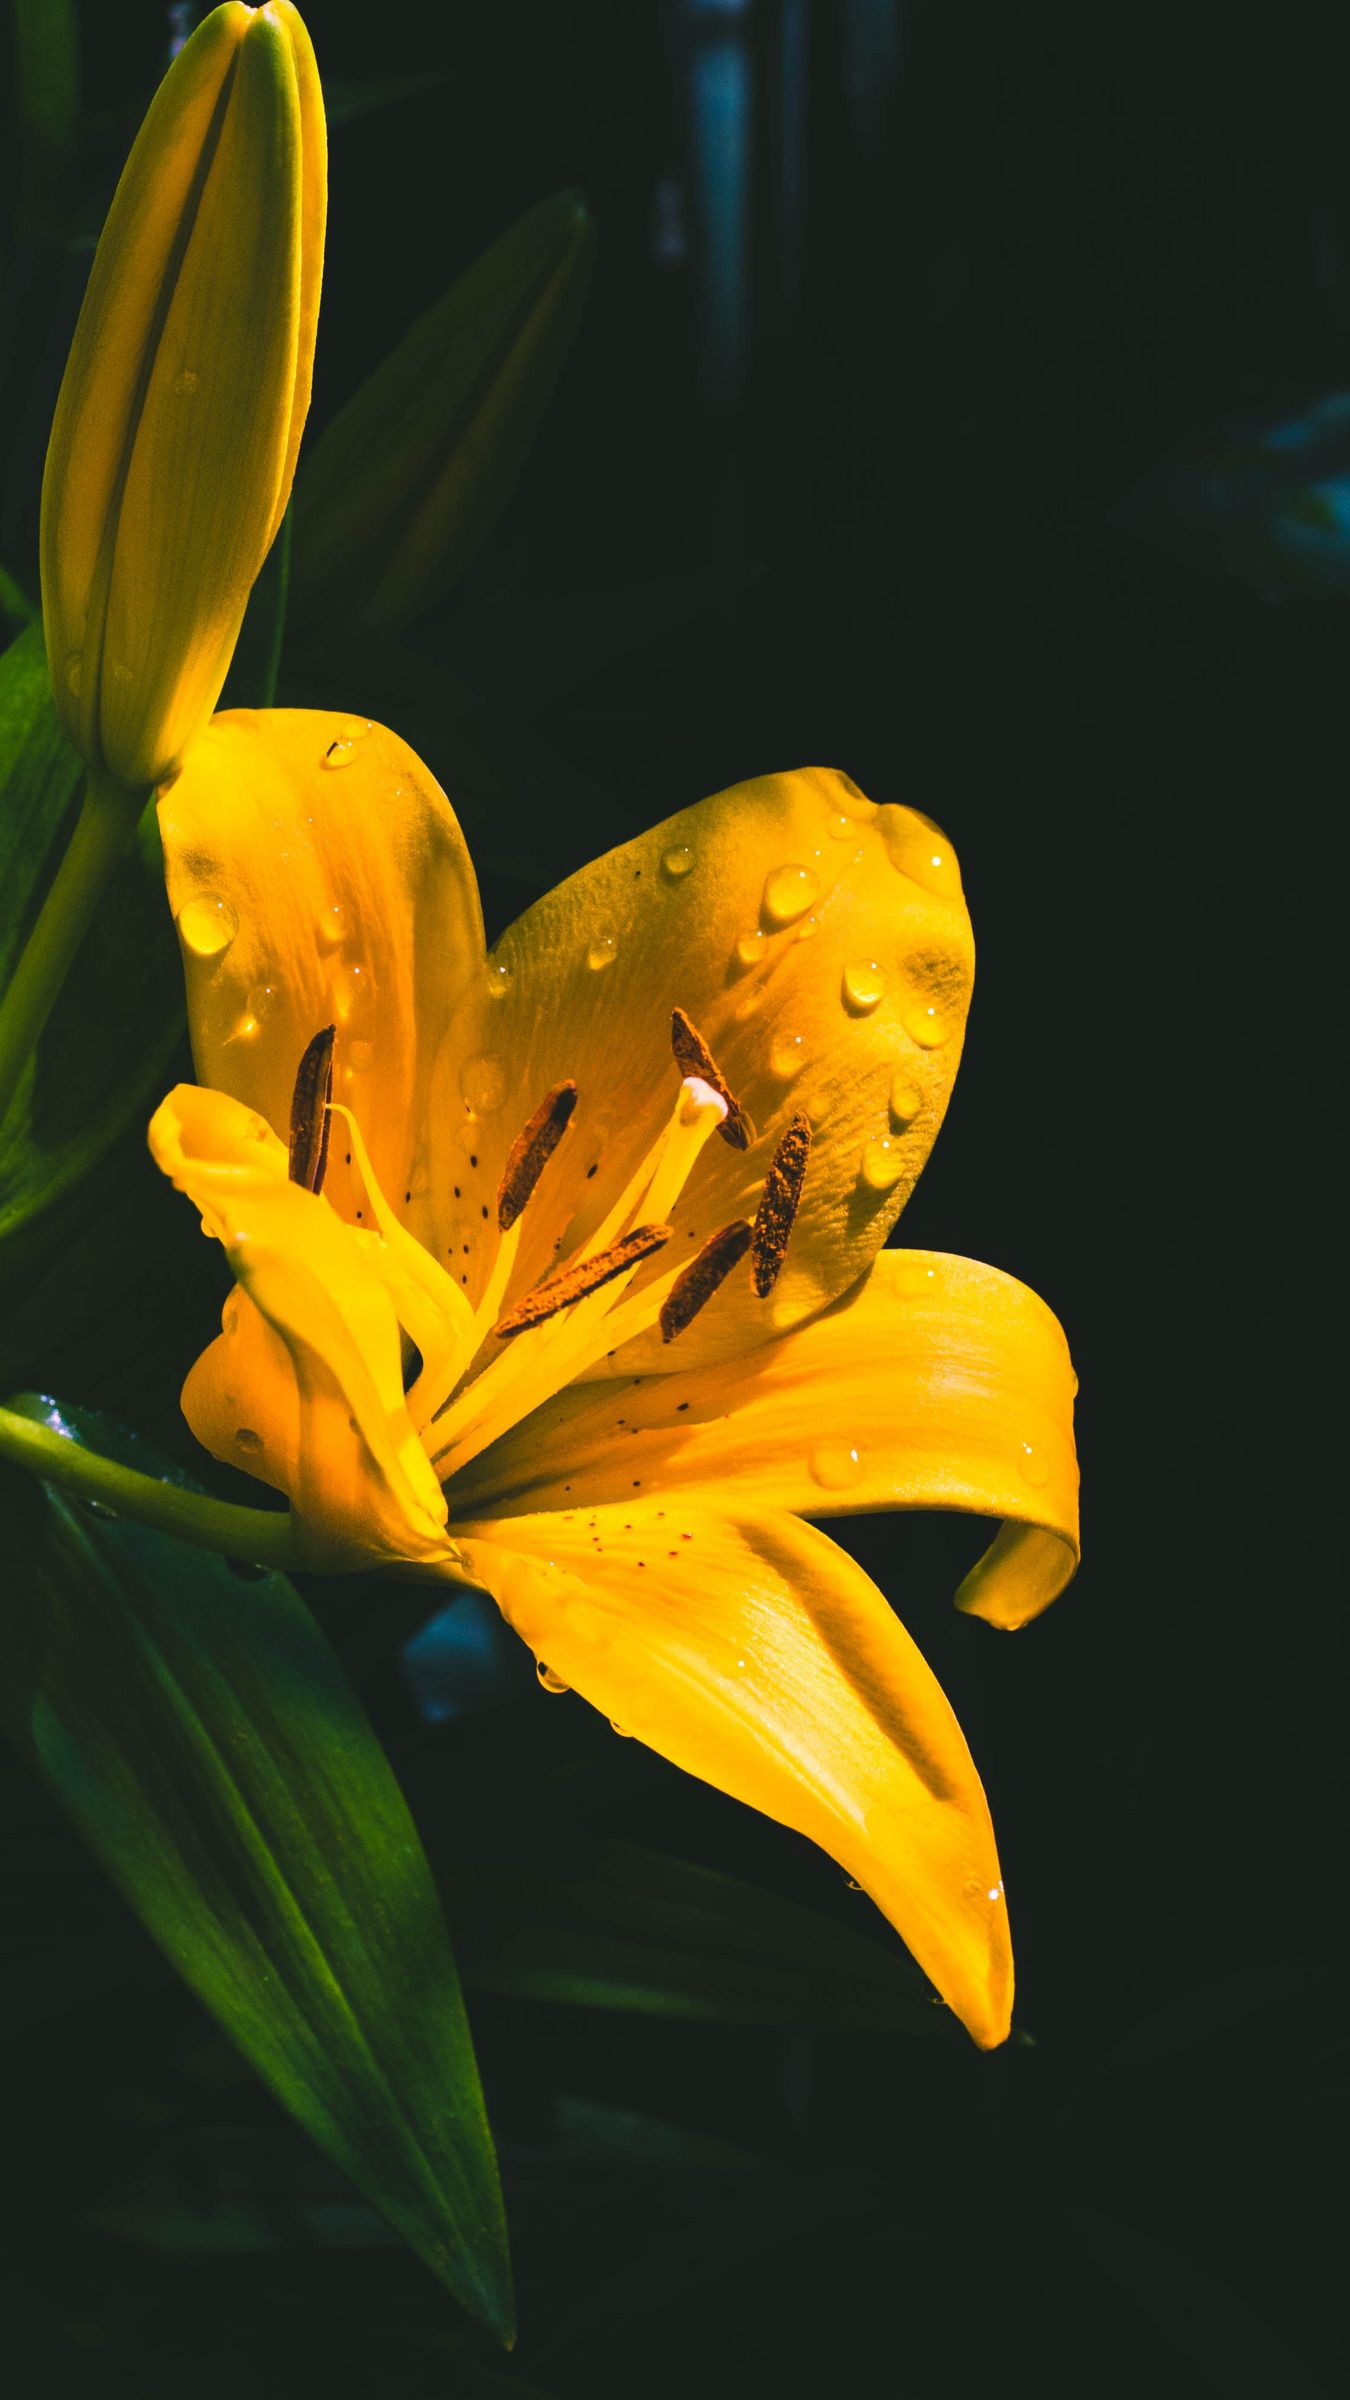 Download wallpaper 1350x2400 lily, flower, yellow, wet, drops iphone 8+/7+/6s+/for parallax HD background